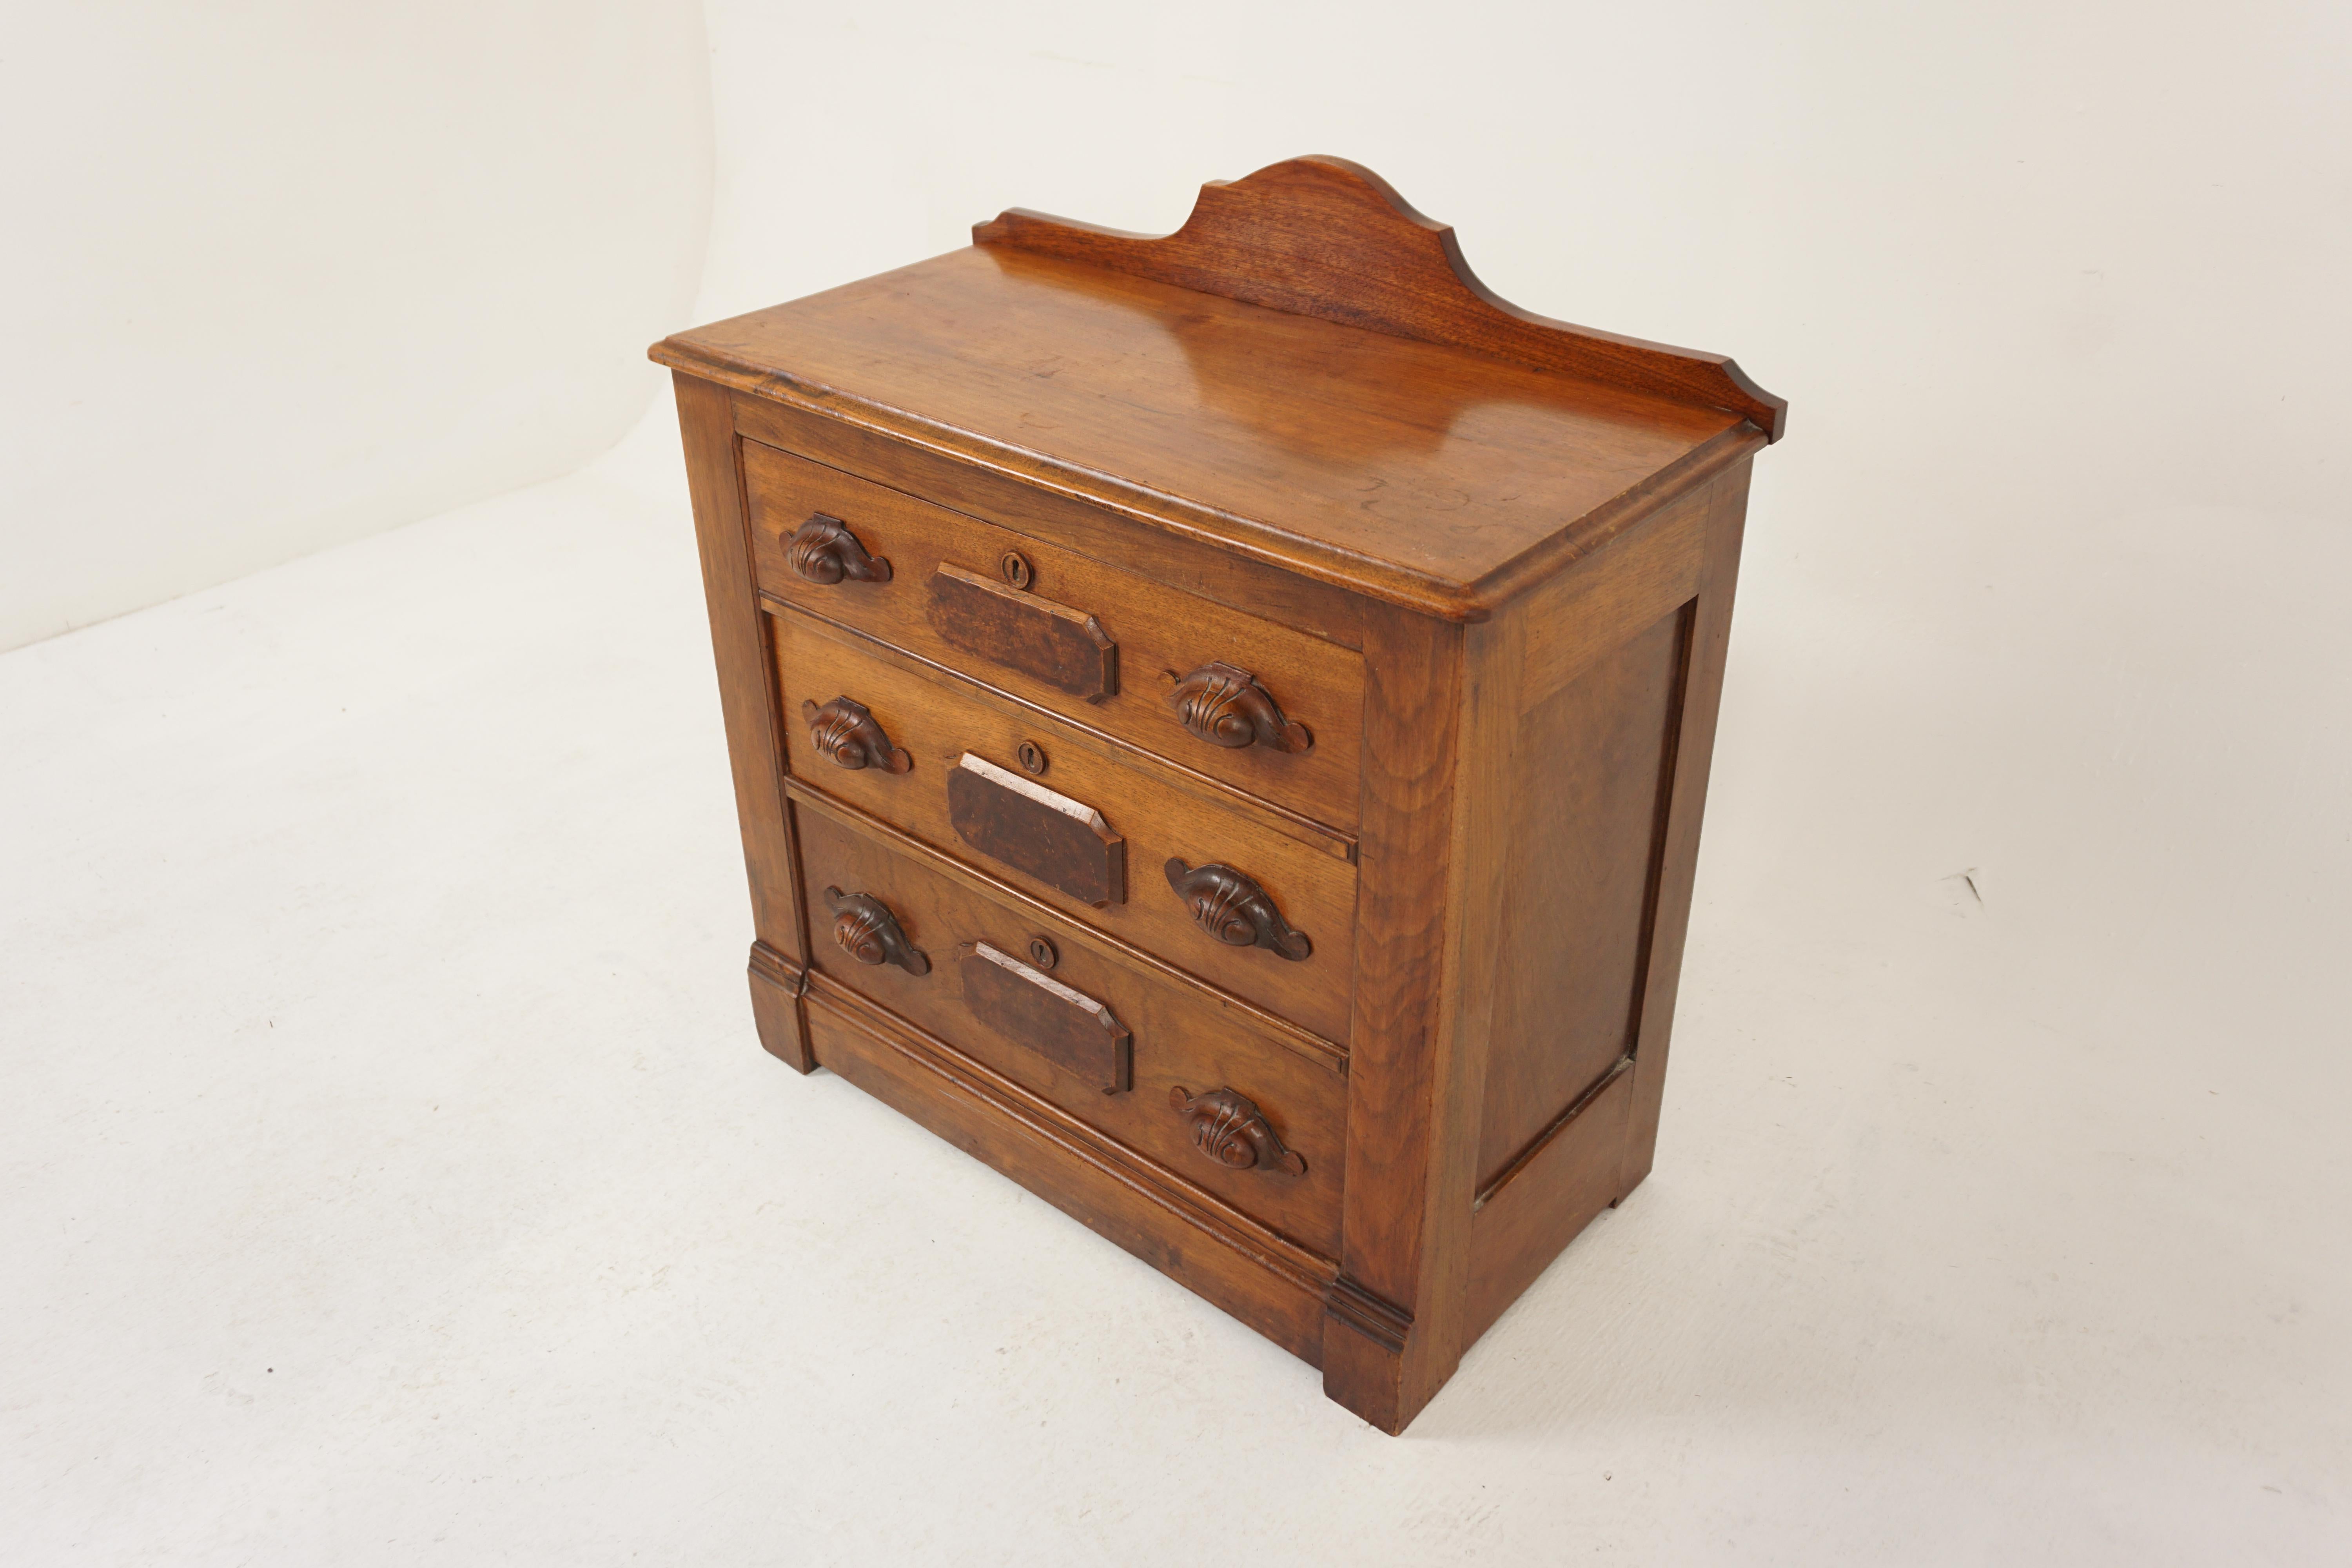 Antique East Lake Solid Walnut 3 Drawer Dresser, Night Stand, America 1890, H1186

America 1890
Solid Walnut
Original finish
Shaped pediment on top
Bevelled moulded top
Three graduating drawers below
With carved drawer pulls and wooden